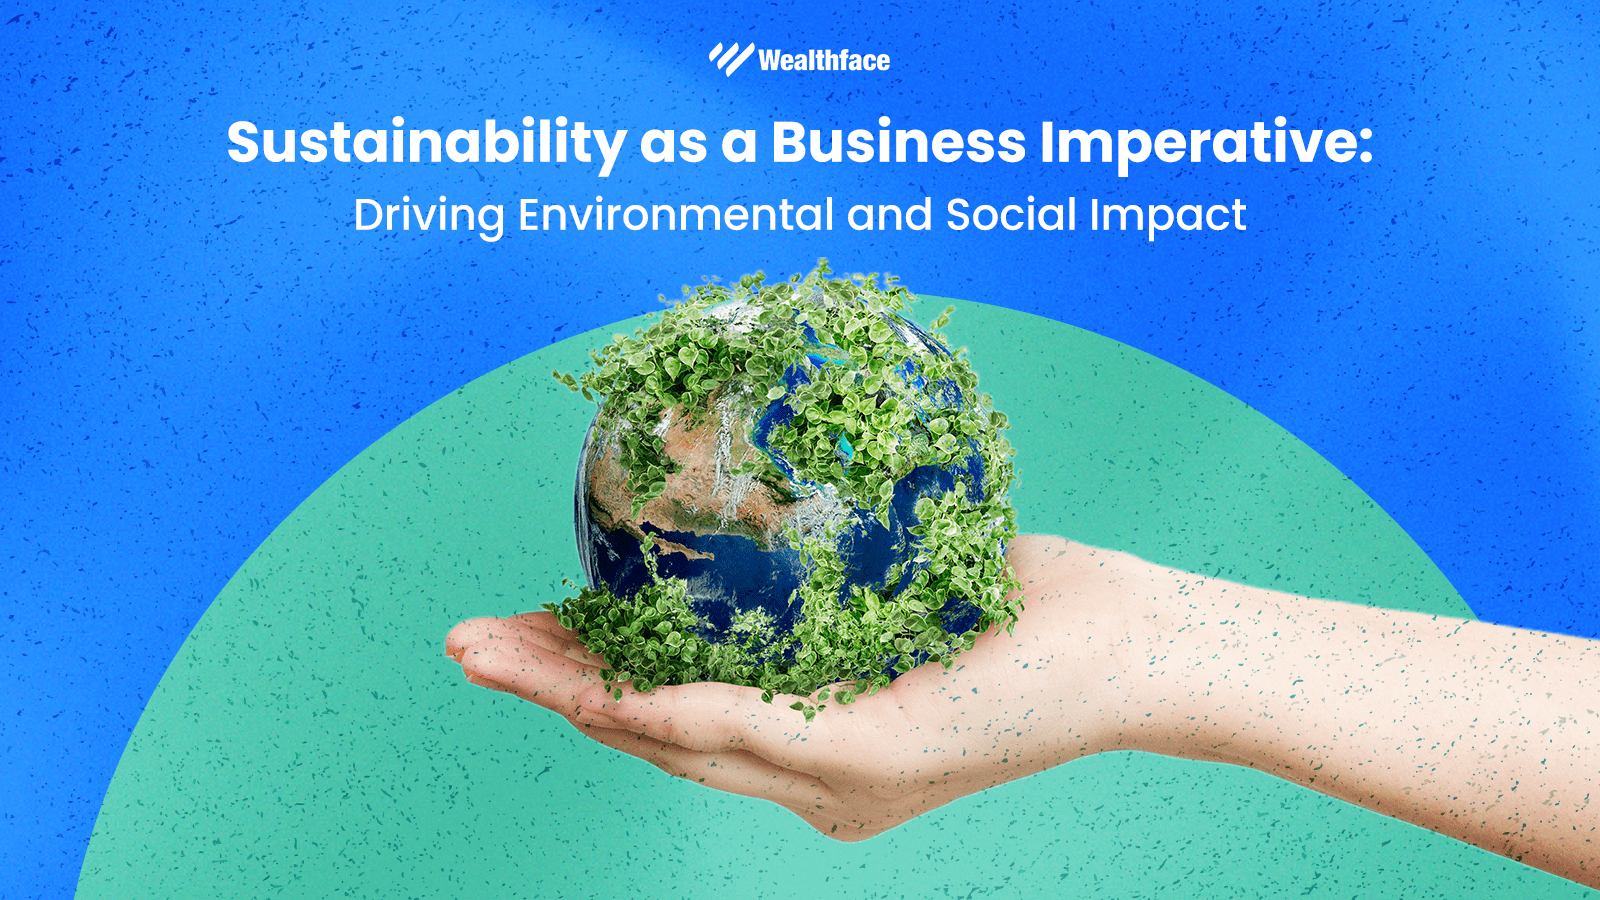 Sustainability as a Business Imperative: Driving Environmental and Social Impact